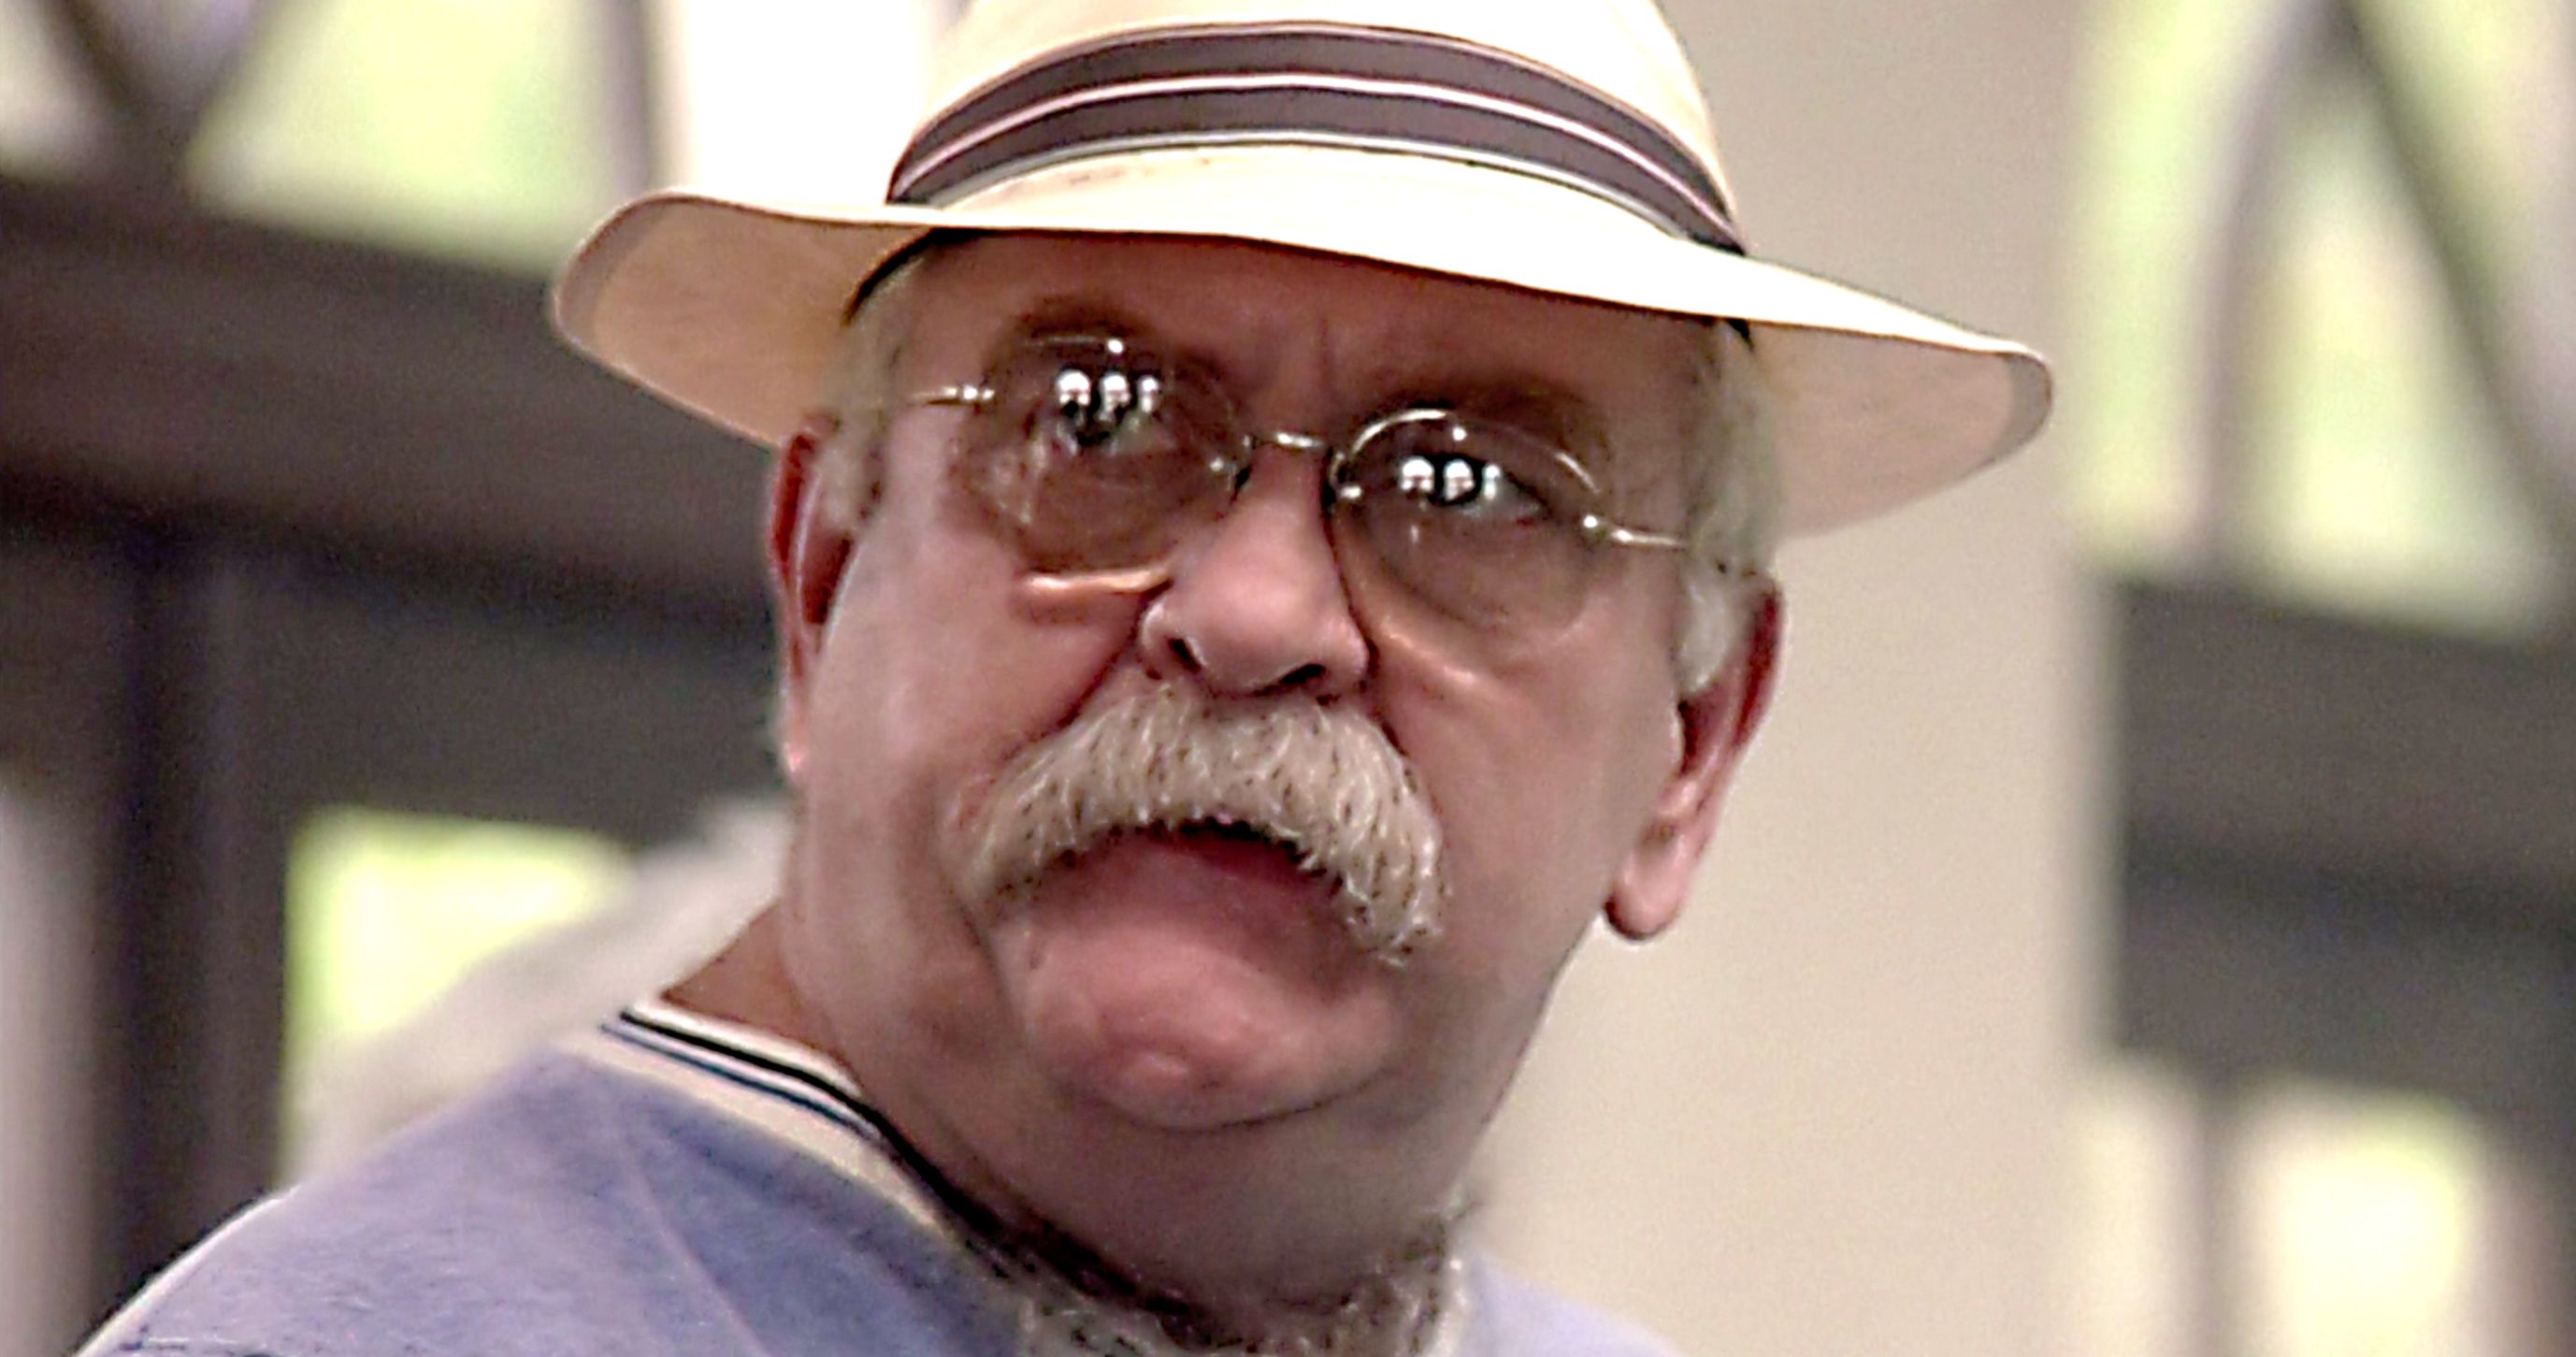 Wilford Brimley Dies, Legendary Actor, the Face of Quaker Oats Was 85